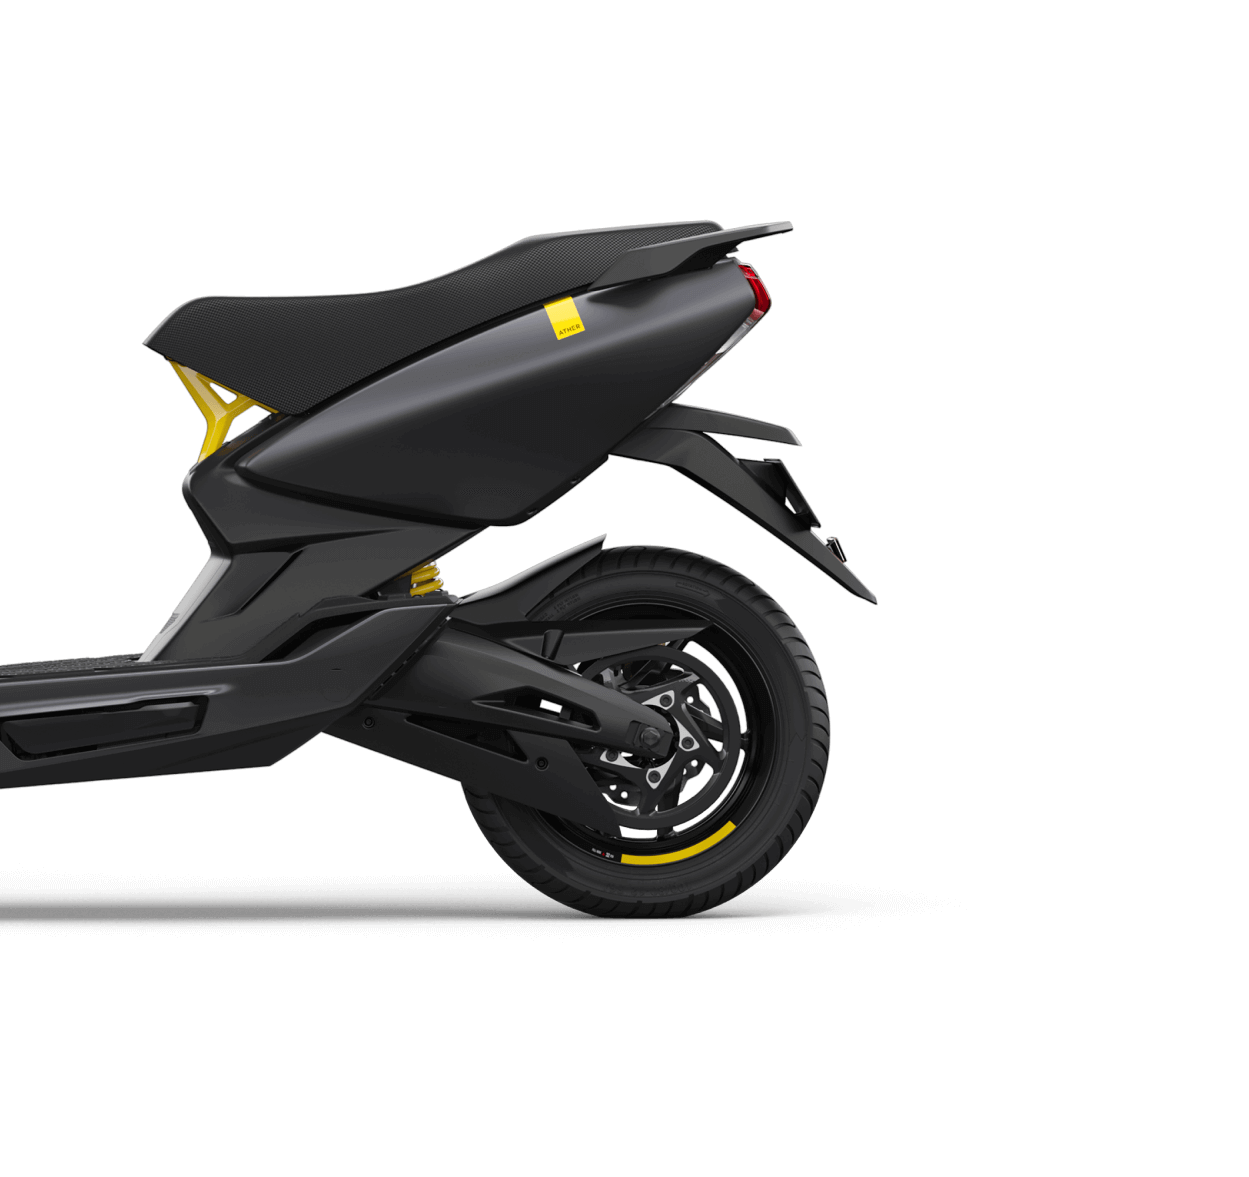 ather electric scooter space grey colour